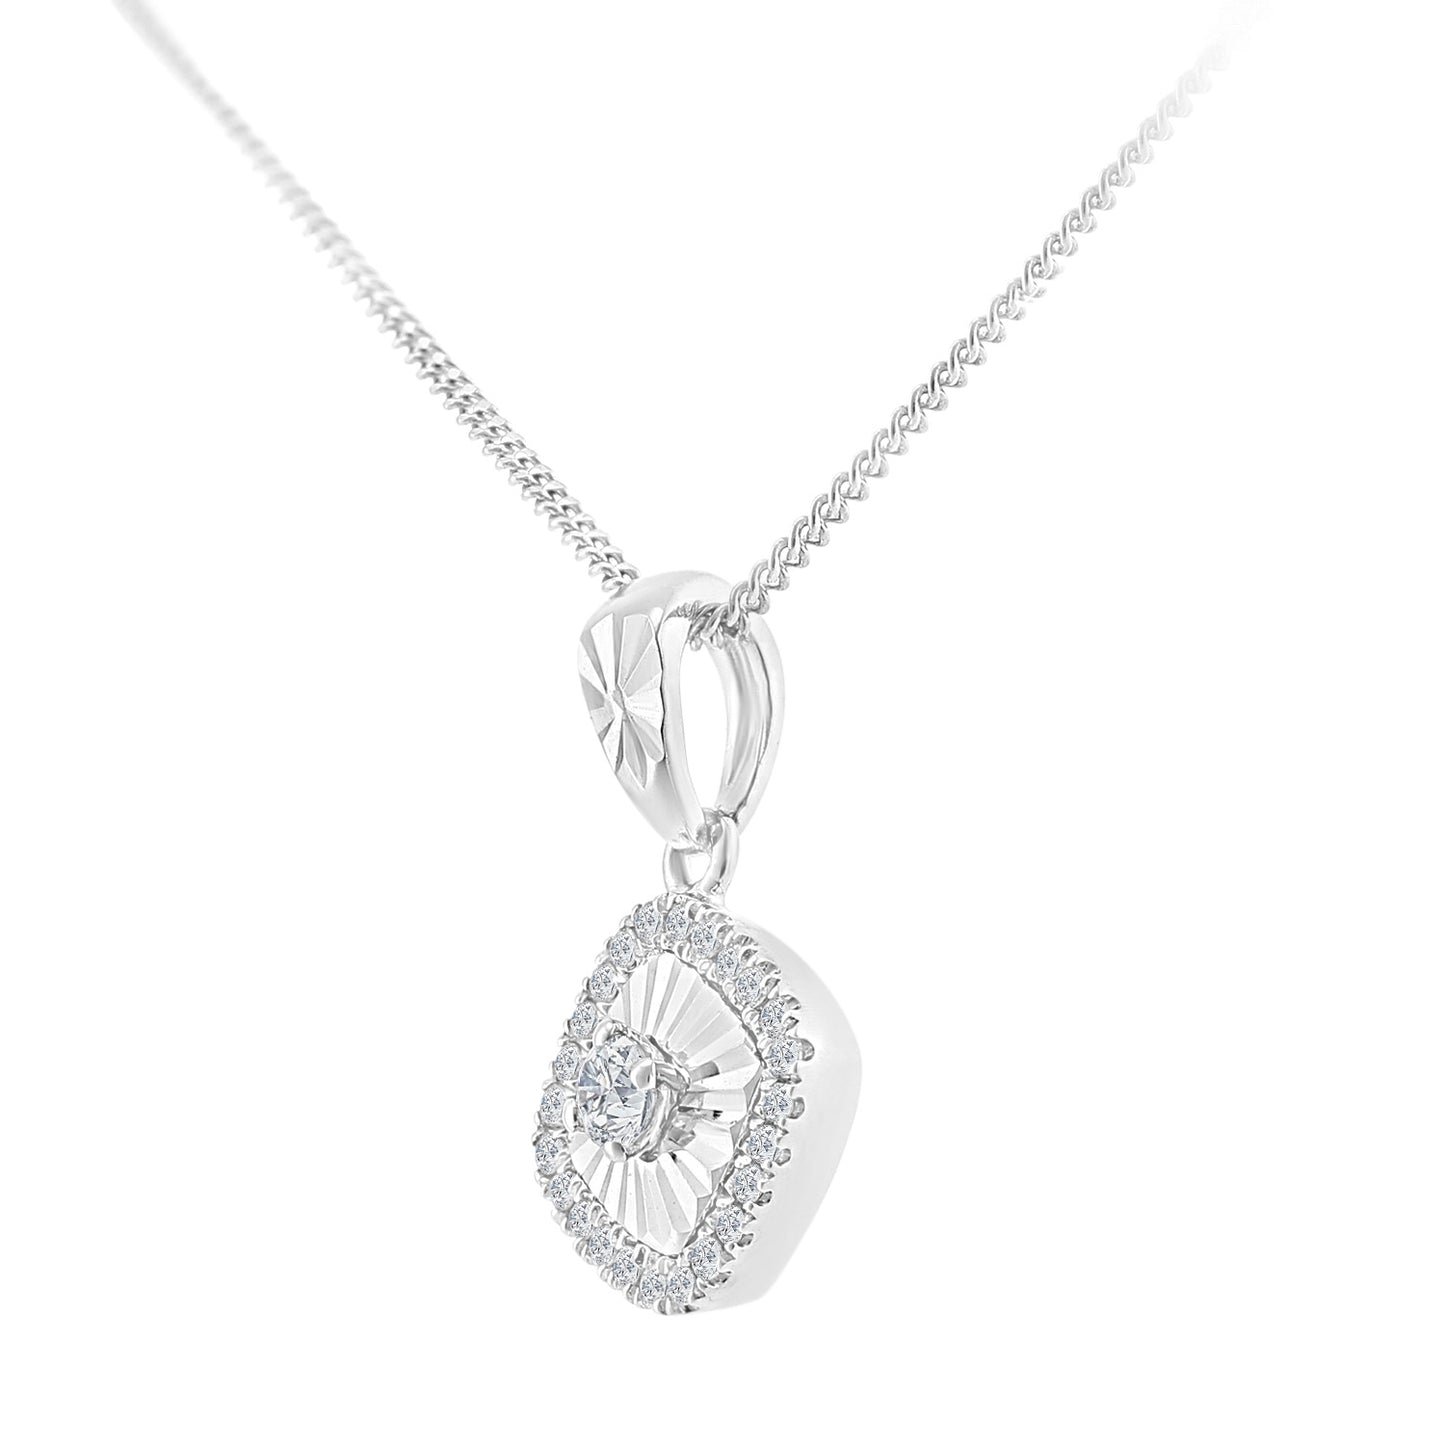 18ct White Gold  5pts Diamond 6pts Halo Pendant Necklace 18 inch - PP2AXL0157W18